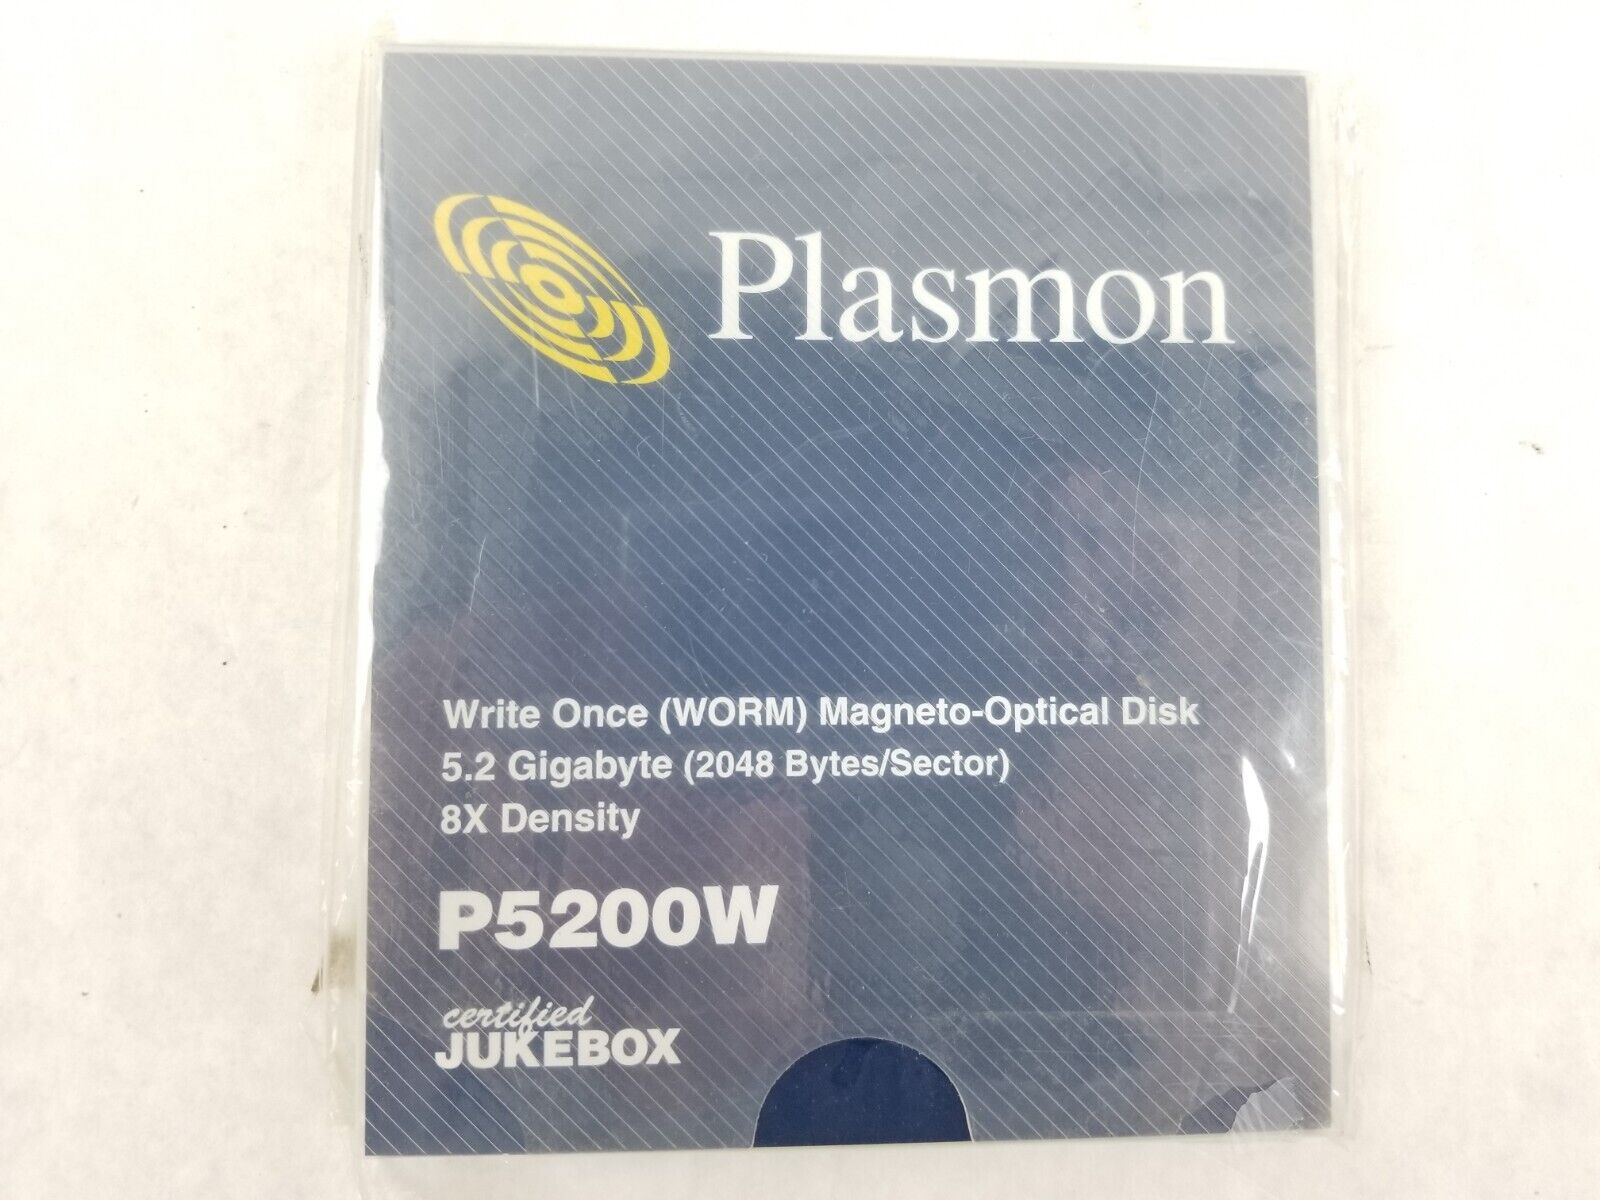 Plasmon P5200W 5.2GB WORM Write Once Magneto-Optical Disk NEW